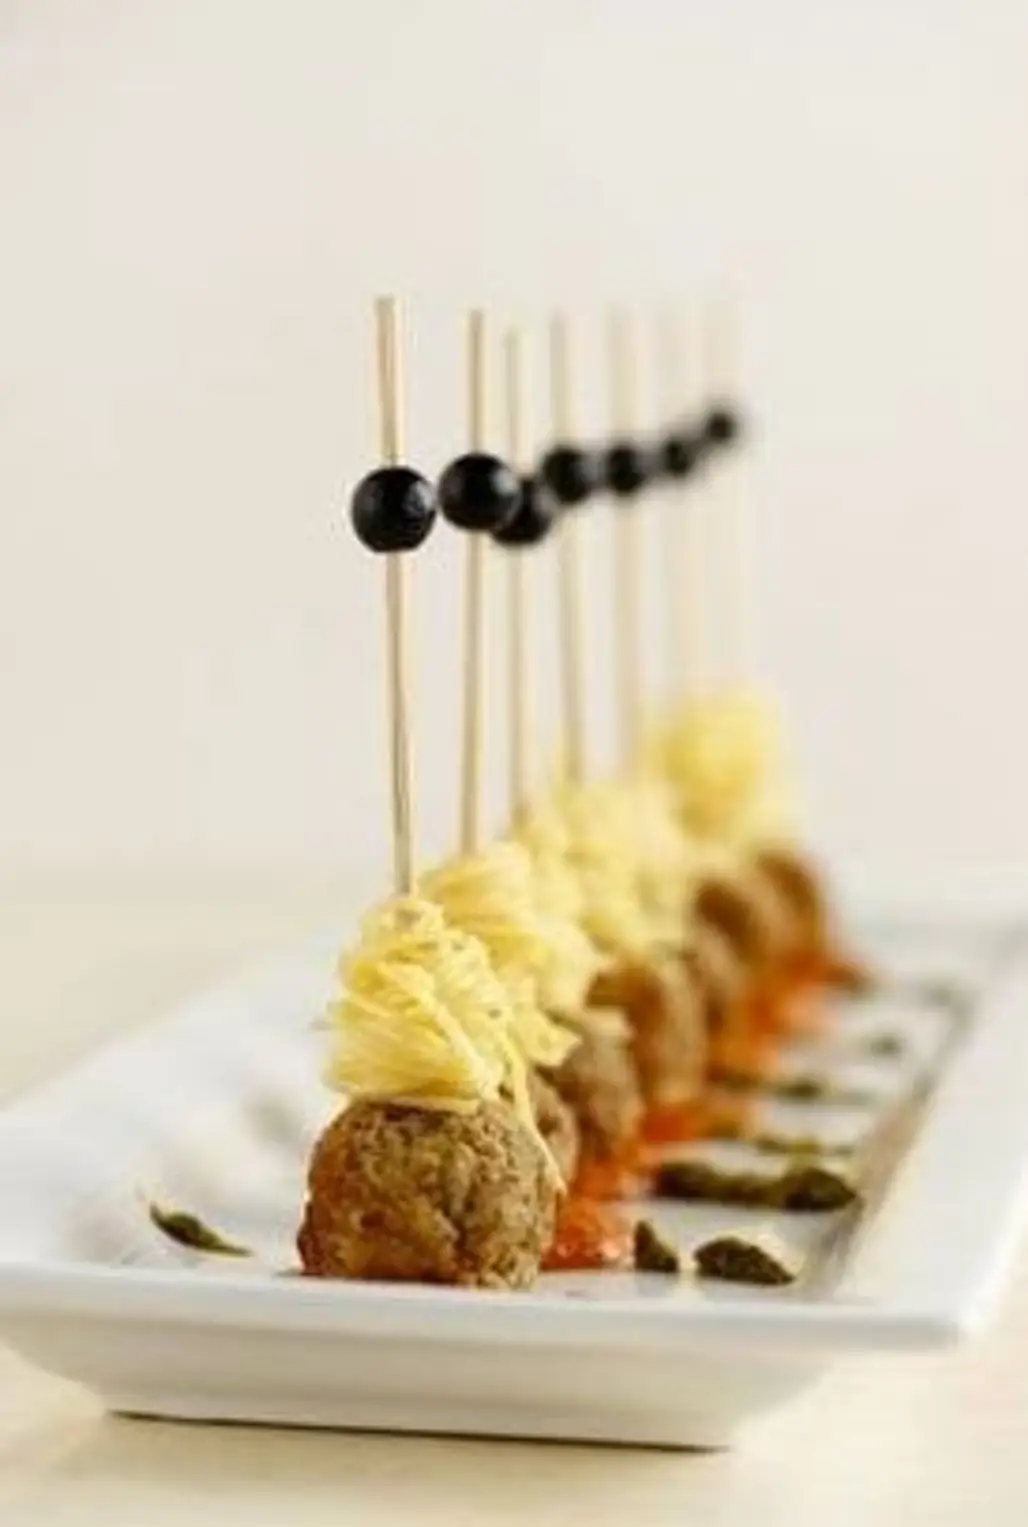 Mini Meatballs and Spagetti Appetizers